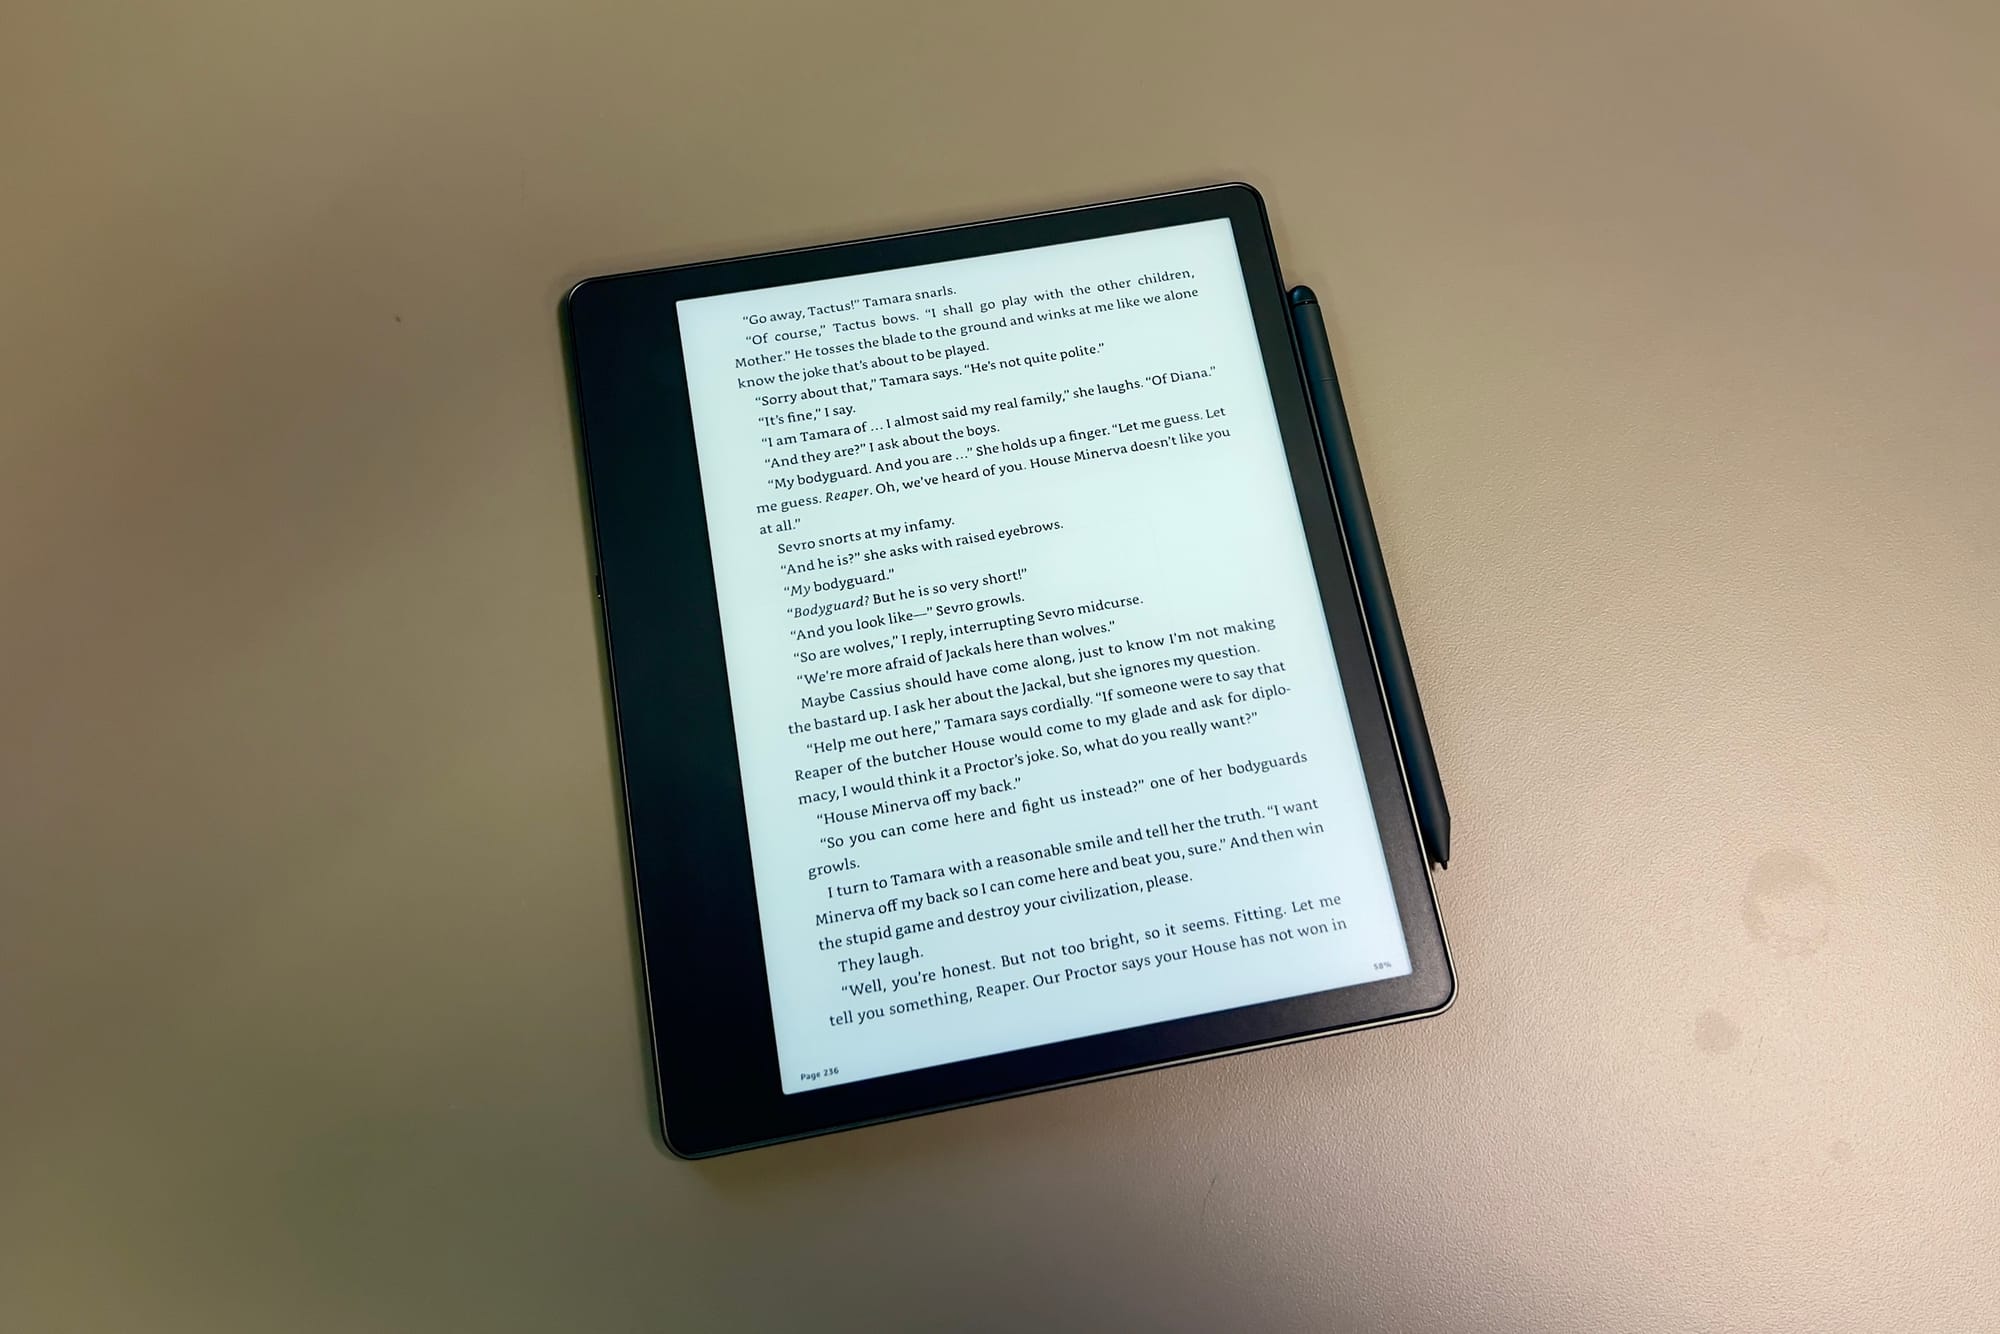 Kindle vs Paperwhite vs Oasis vs Scribe: Which Kindle is